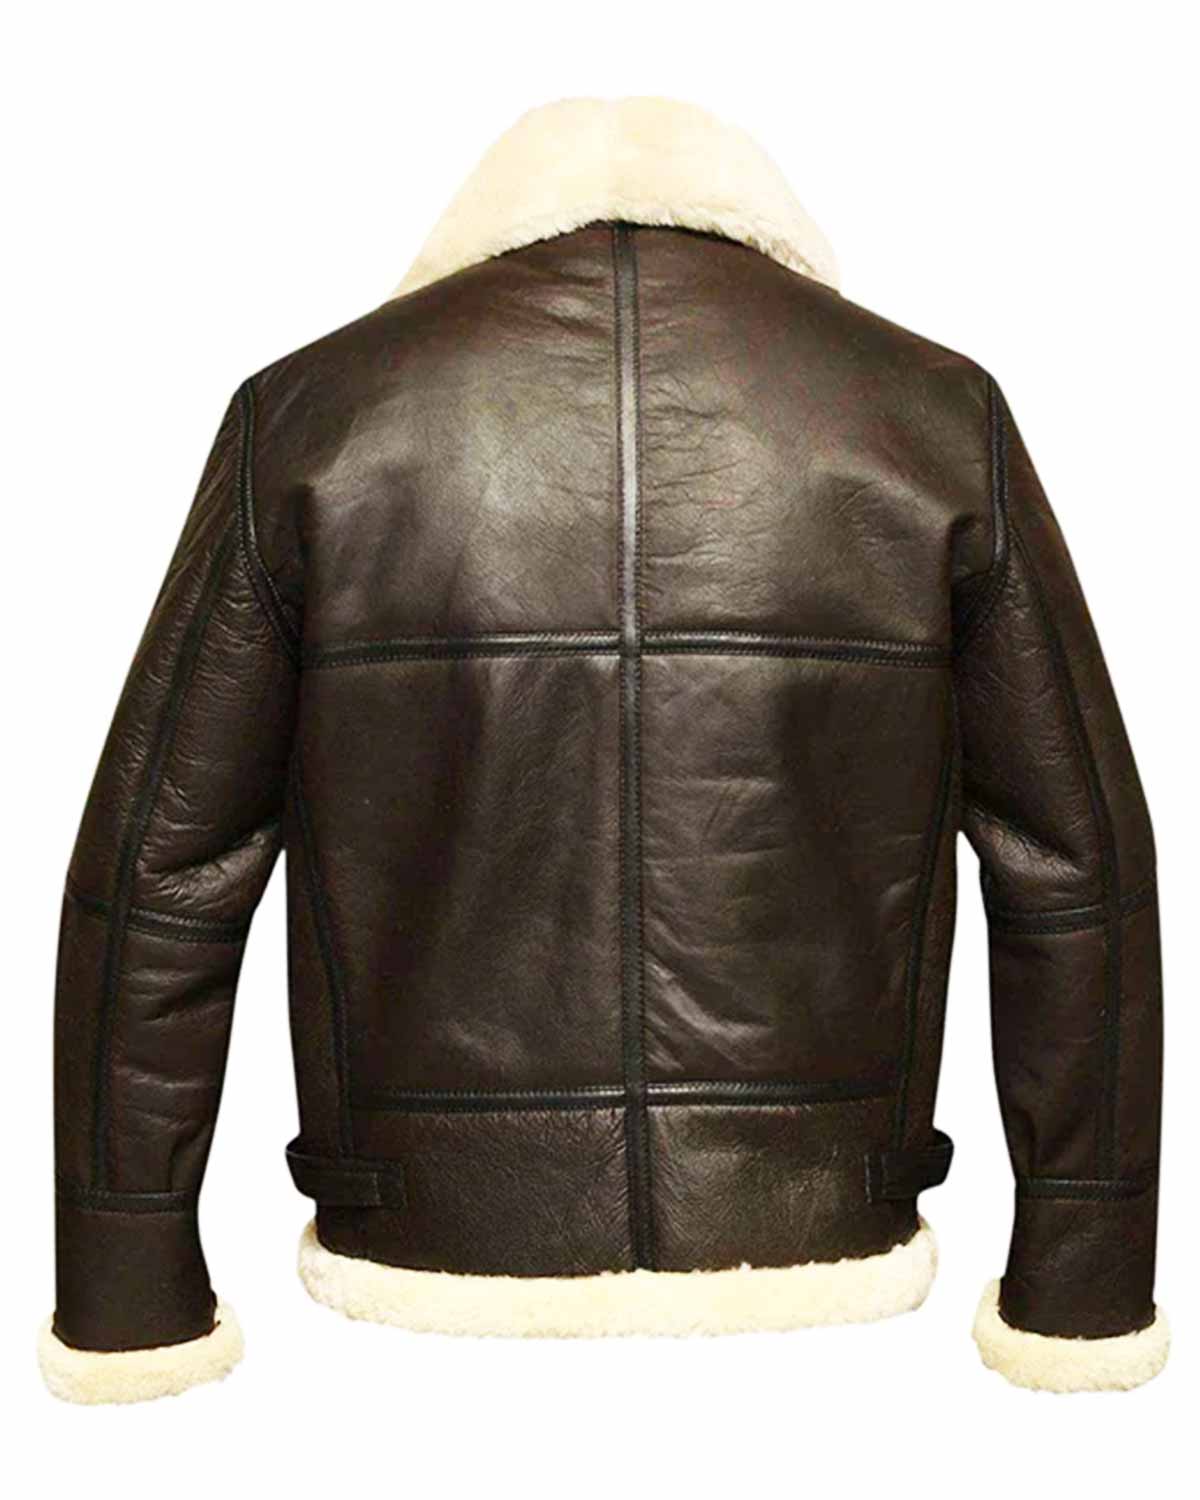 Elite B3 Bomber Aviator Shearling Leather Jacket With Faux Fur